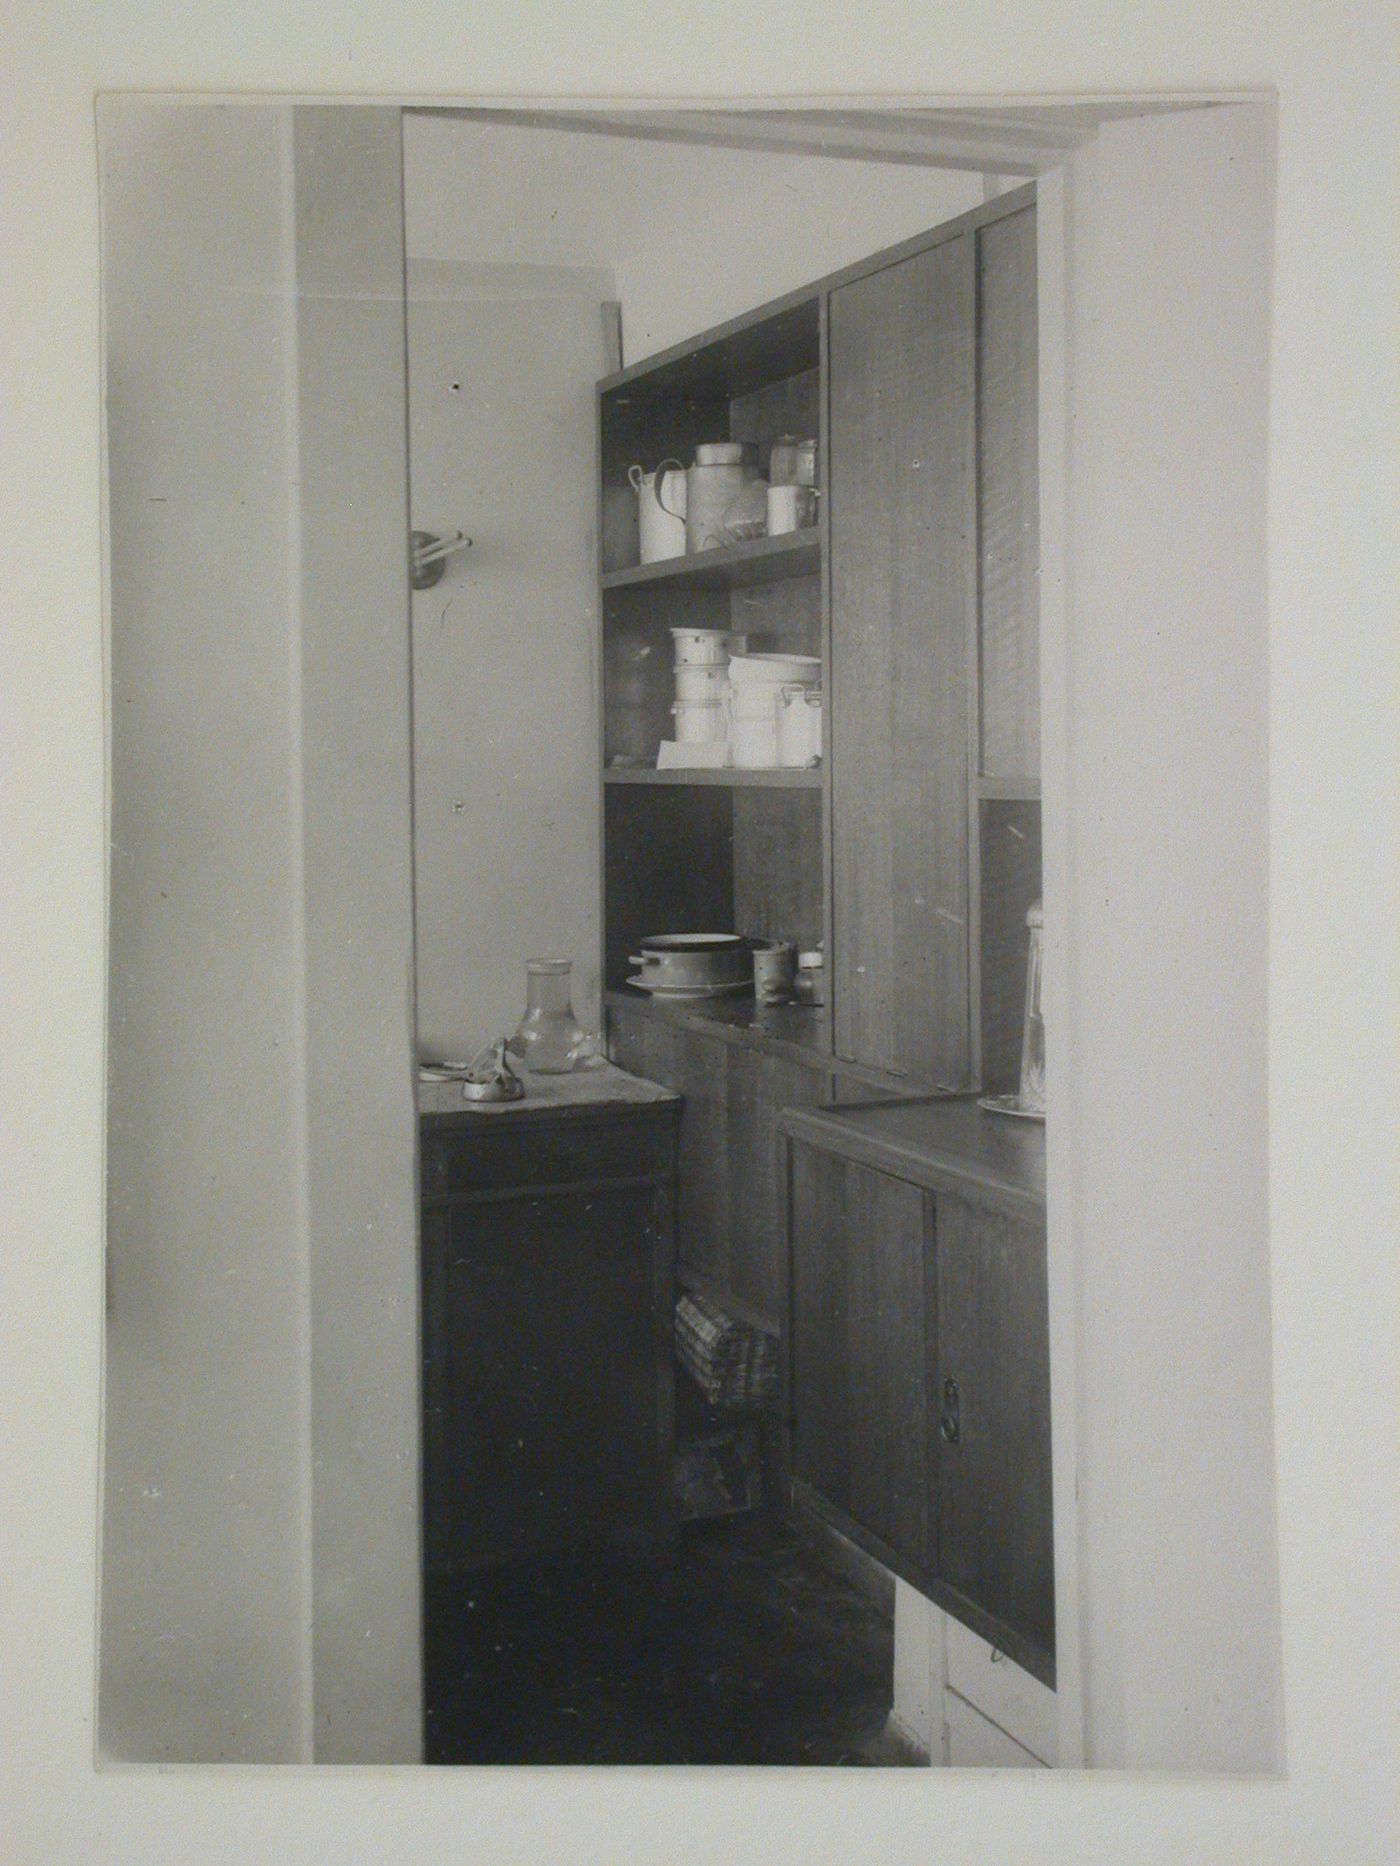 Interior view of Nikolai Milutin's apartment showing the built-in kitchen, People's Commissariat for Finance (Narkomfin) Apartment Building, 25 Novinskii Boulevard, Moscow